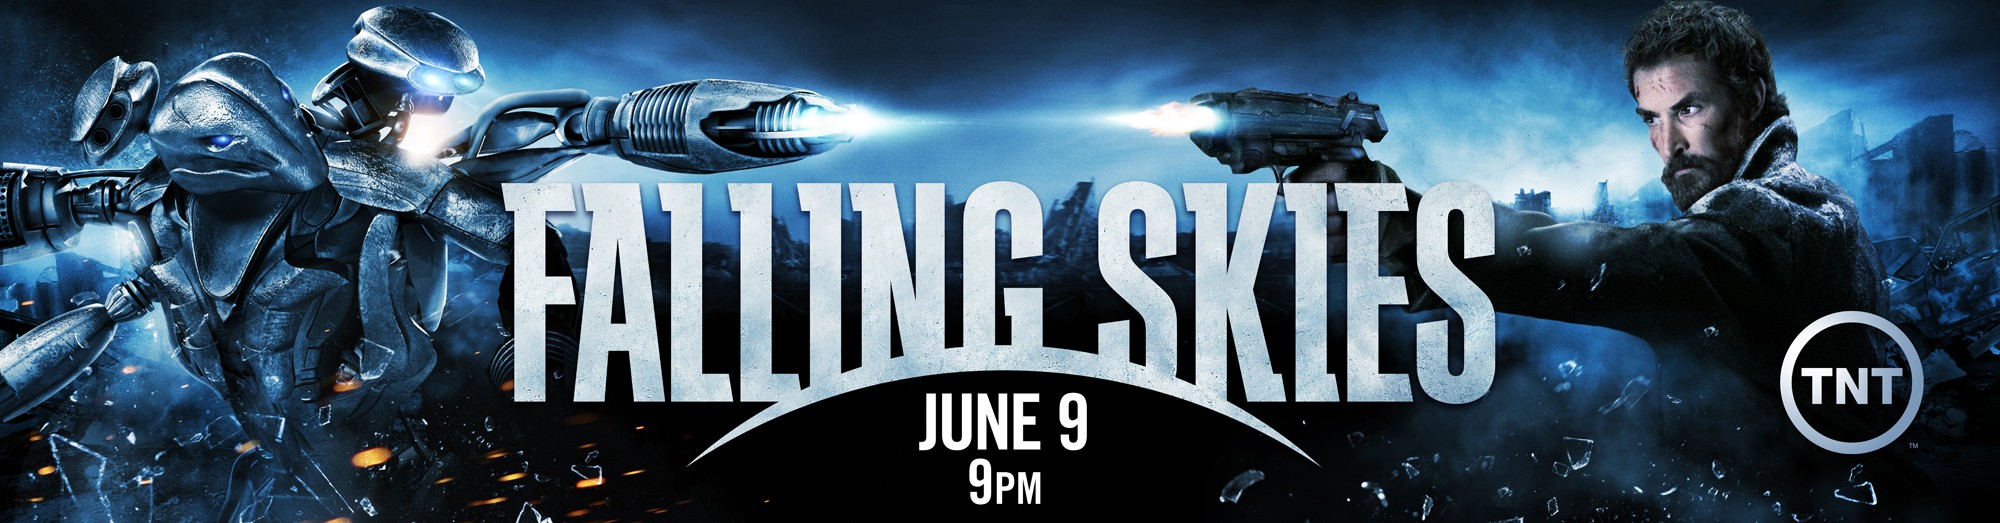 Mega Sized TV Poster Image for Falling Skies (#21 of 24)